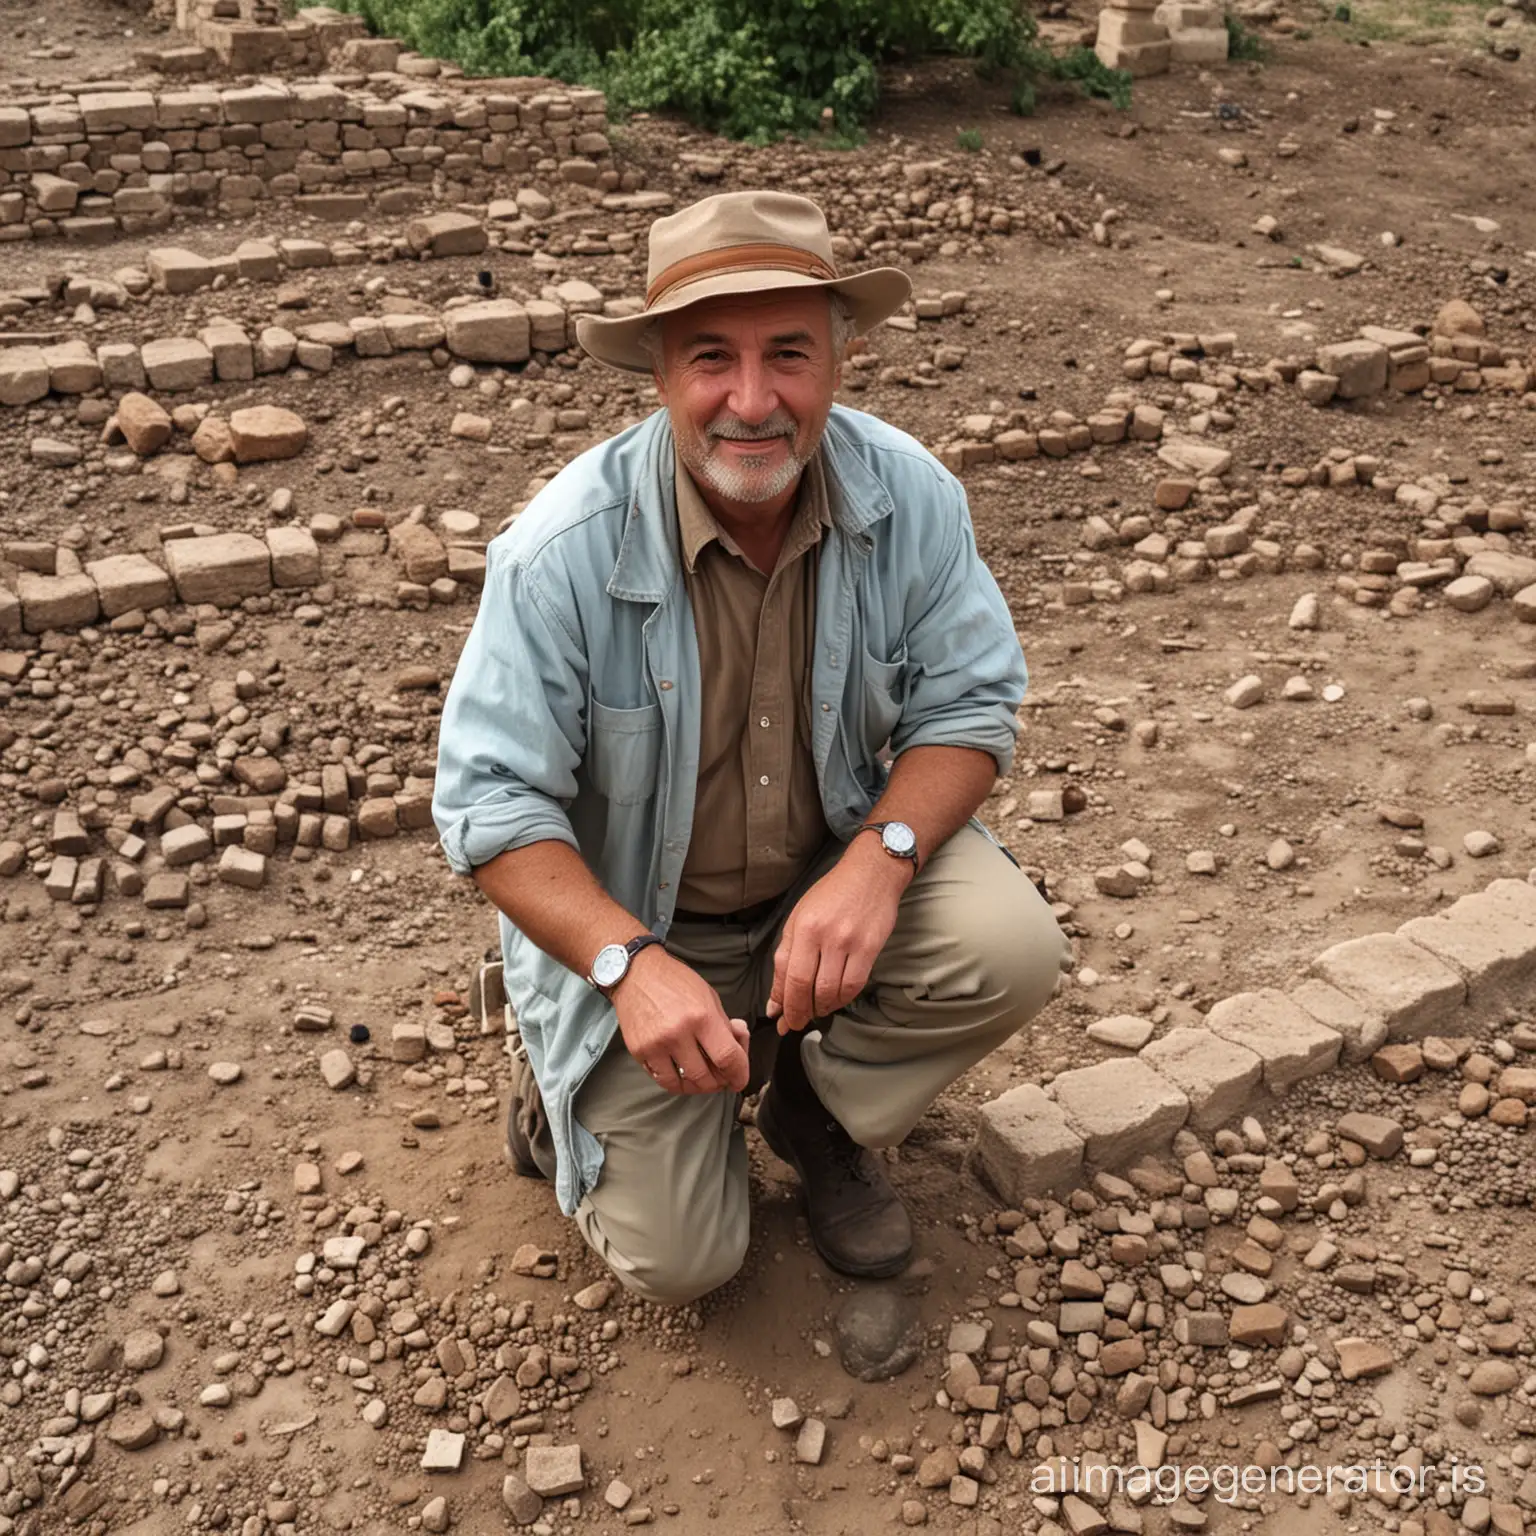 Piero Borgarelli, an archaeologist that make archaeological excavations with many young women and wine.